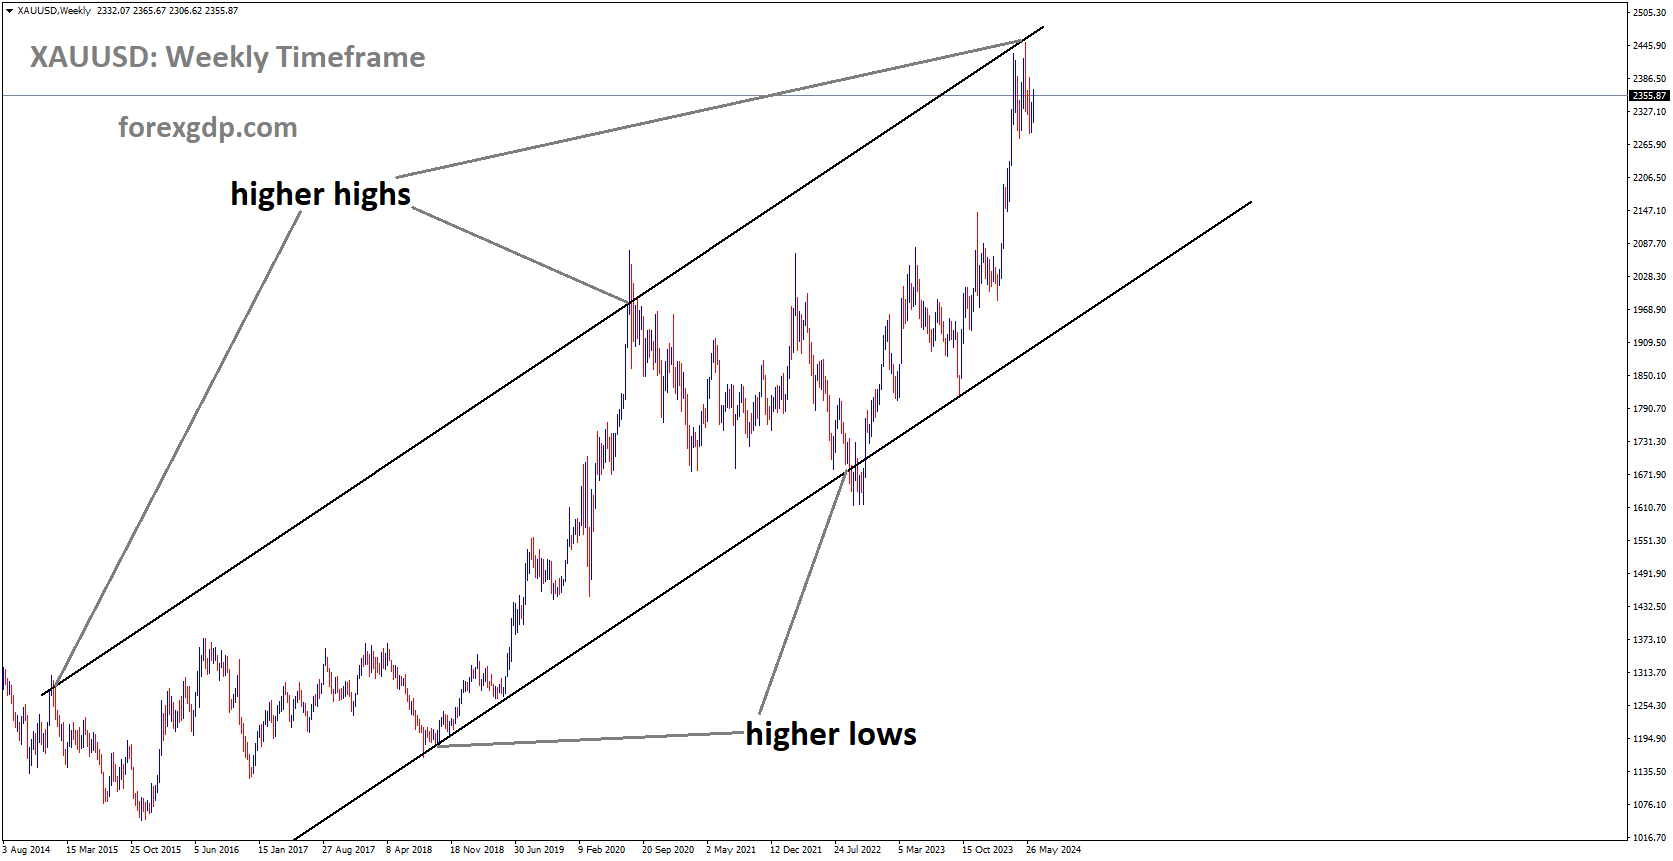 XAUUSD is moving in Ascending channel and market has fallen from the higher high area of the channel